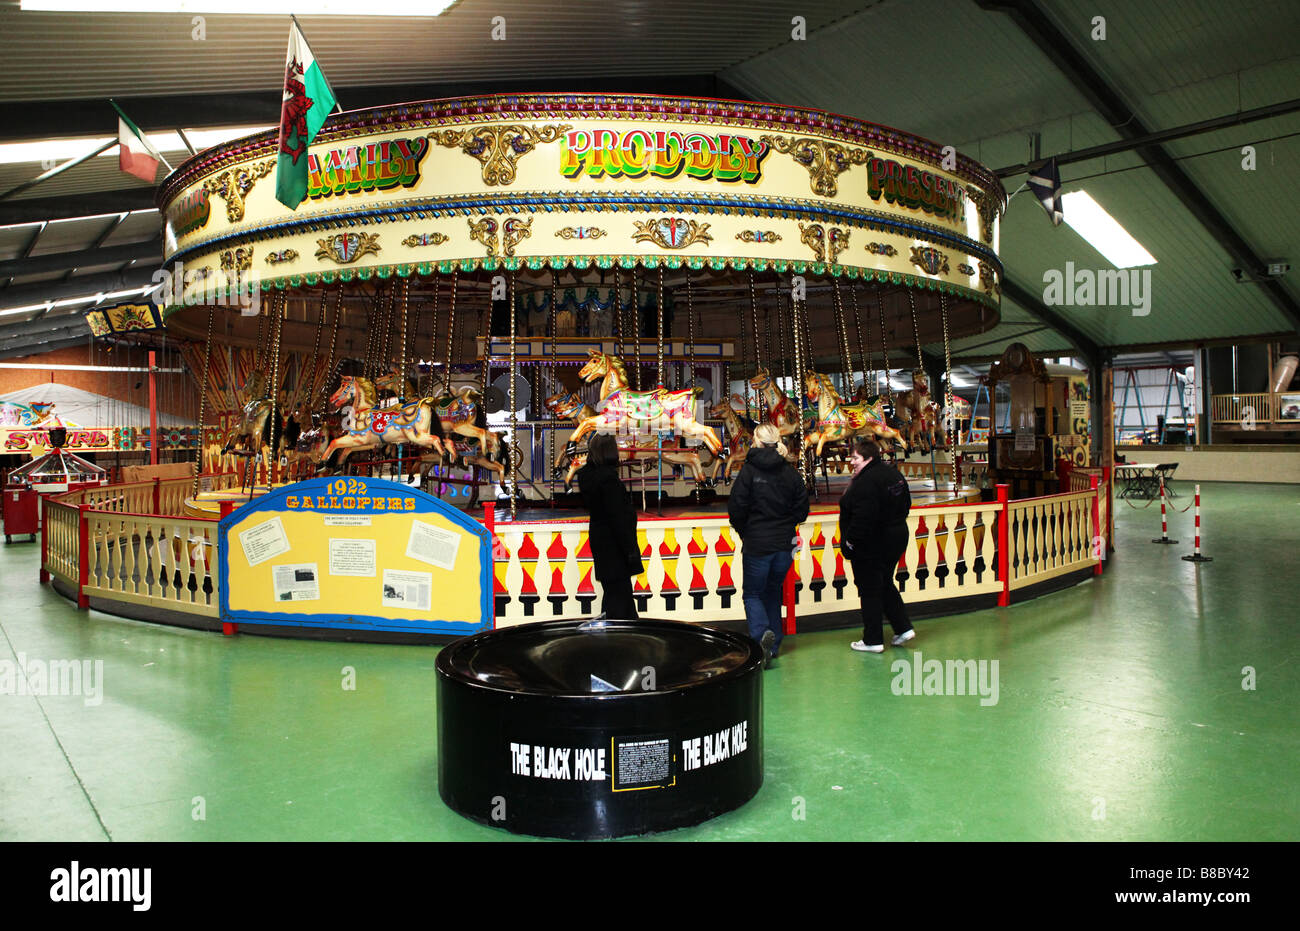 A traditional wooden merry go round fair ground ride galloping horse carousel indoors large warehouse UK Stock Photo